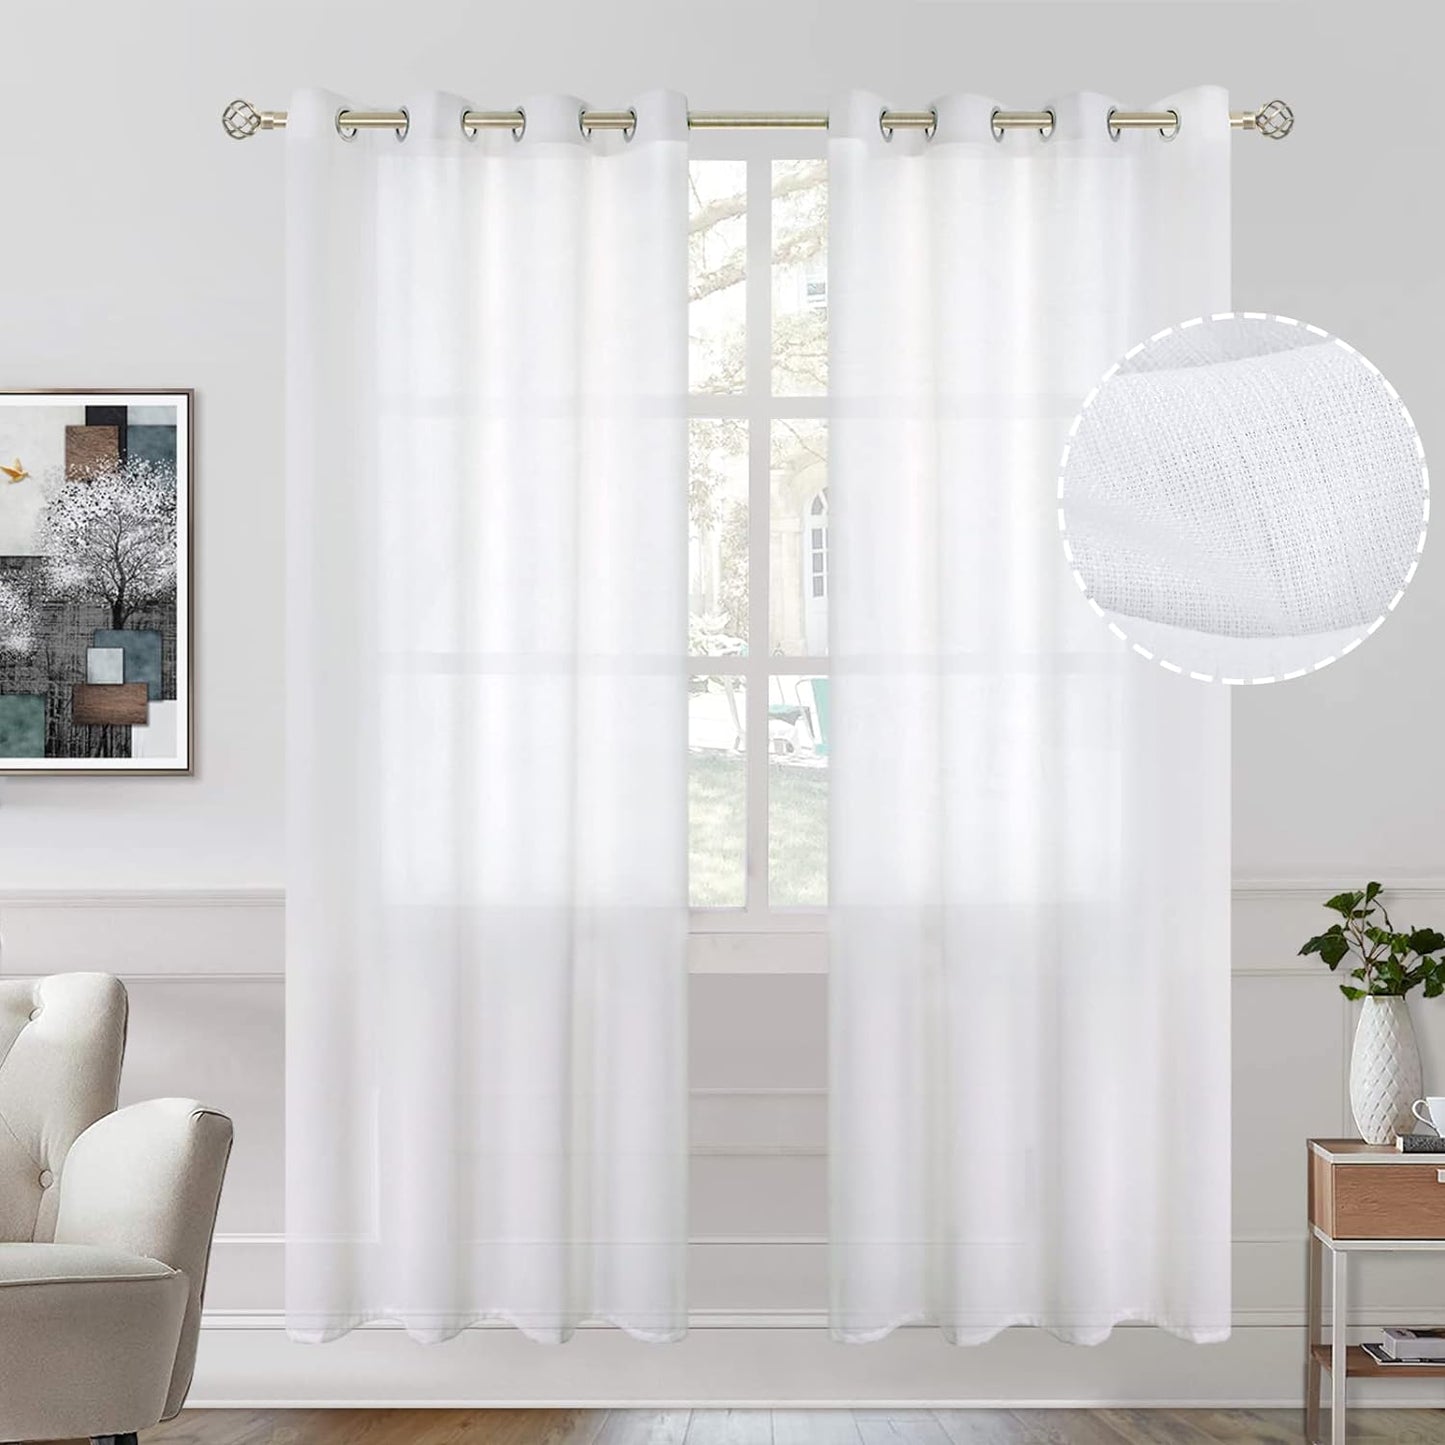 Bgment Natural Linen Look Semi Sheer Curtains for Bedroom, 52 X 54 Inch White Grommet Light Filtering Casual Textured Privacy Curtains for Bay Window, 2 Panels  BGment White 52W X 72L 